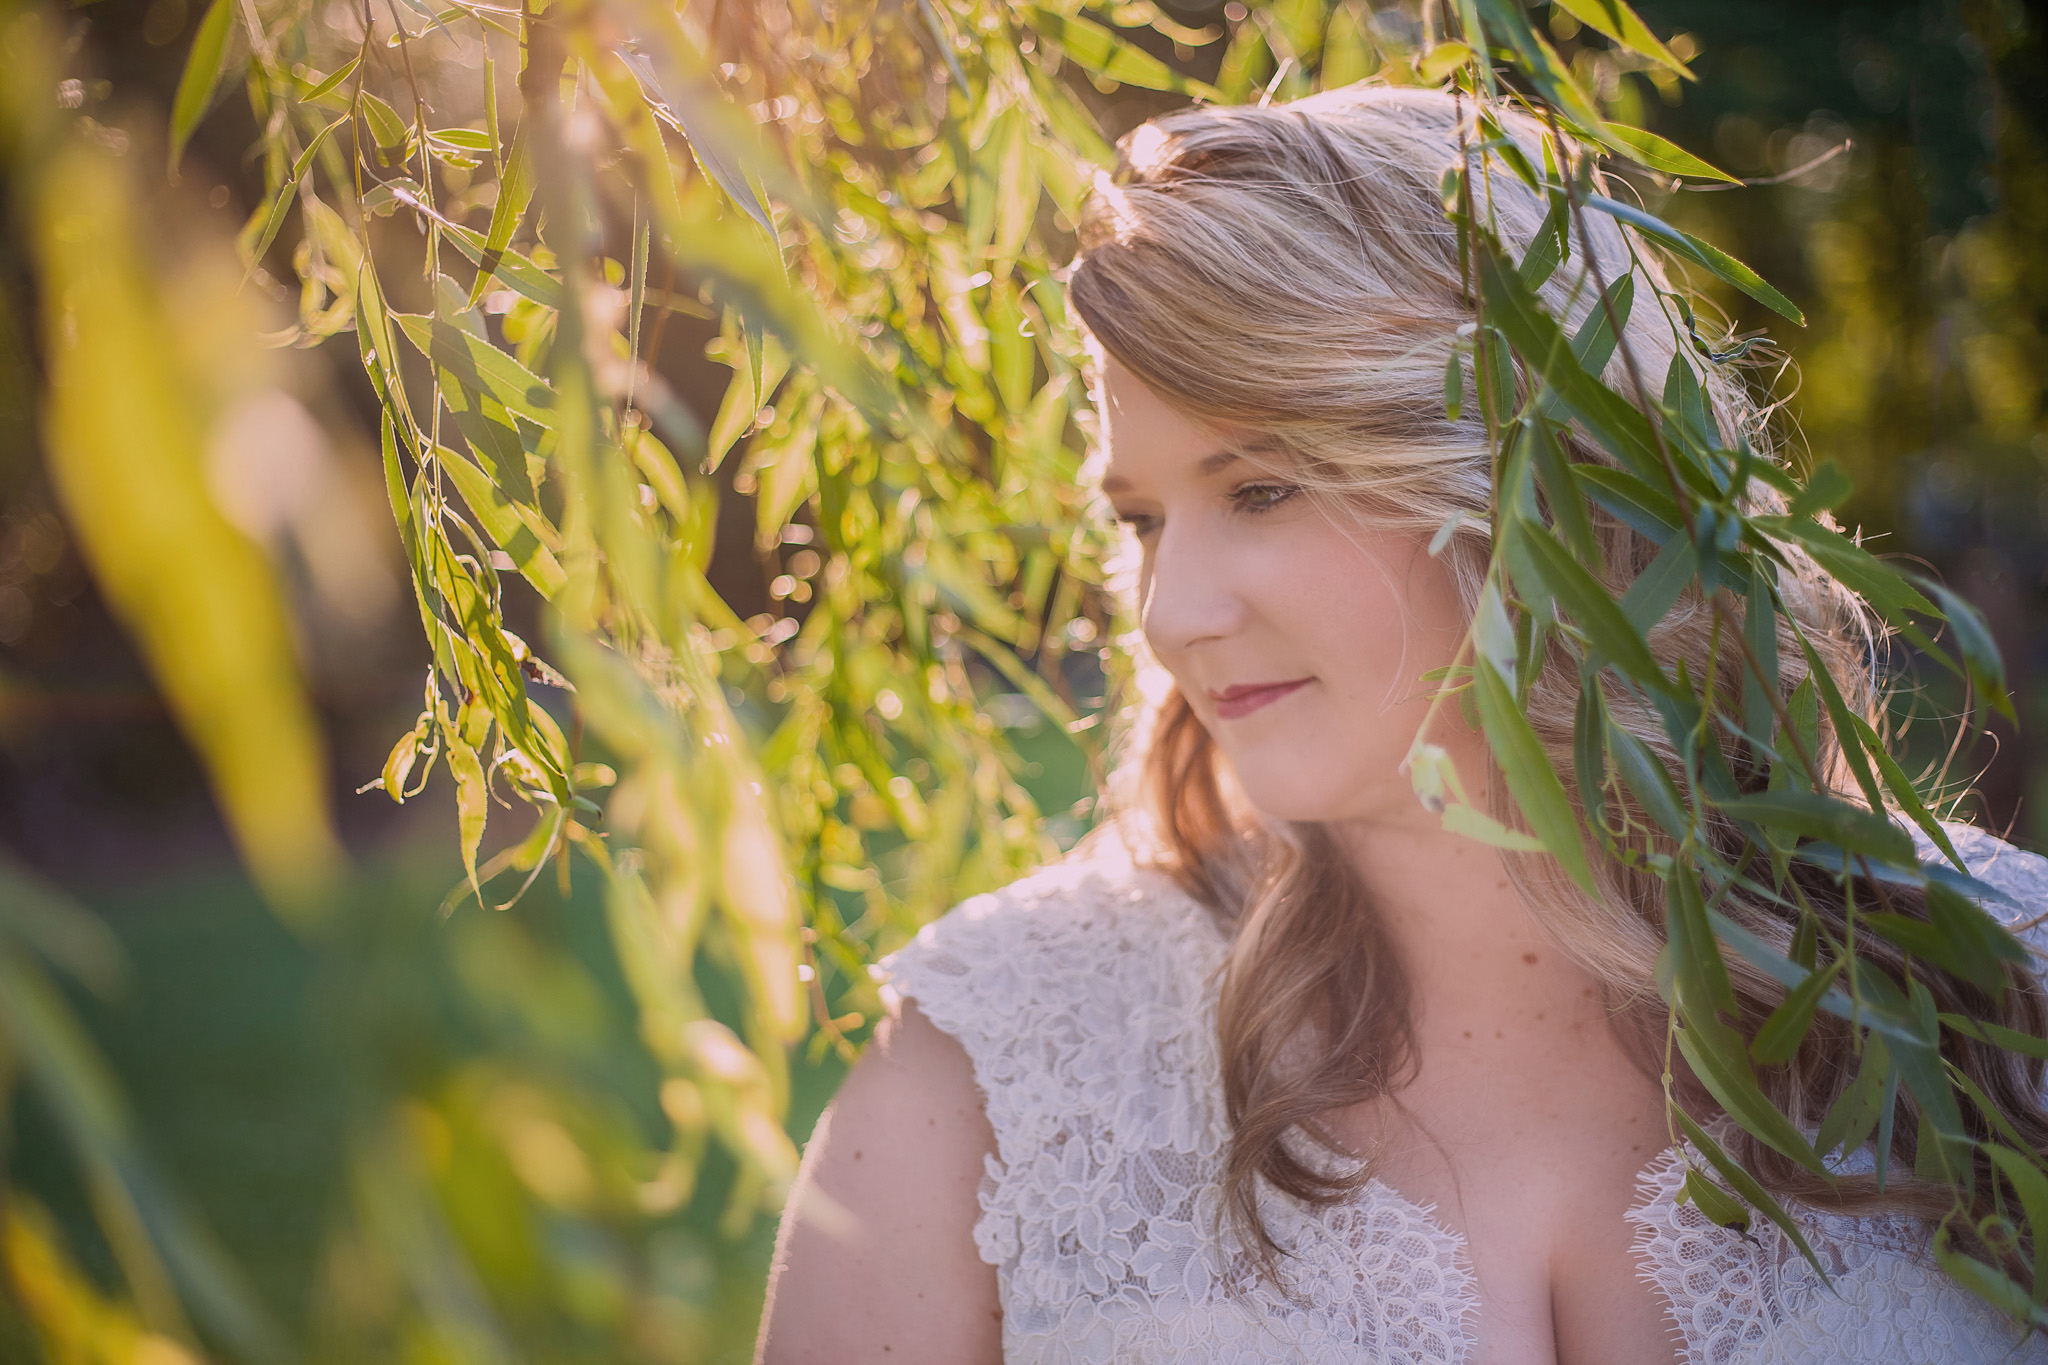 This bride is lovely as the sun filters through the trees during her Asheboro, NC bridal portrait session by Mabyn Ludke Photography